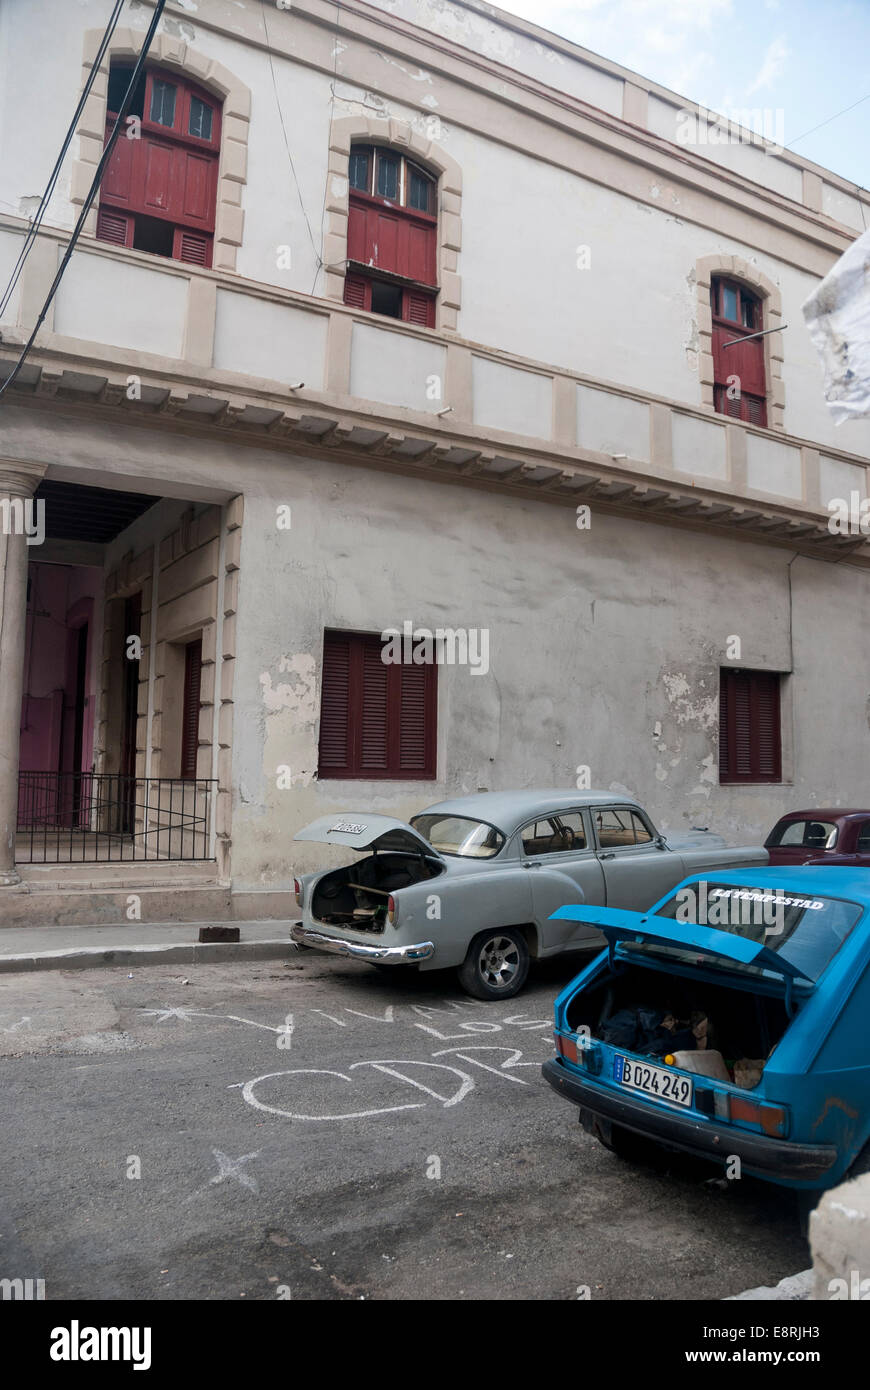 A typical back street scene in a central Havana neighborhood. Old cars with their trunks open awaiting repairs. Stock Photo